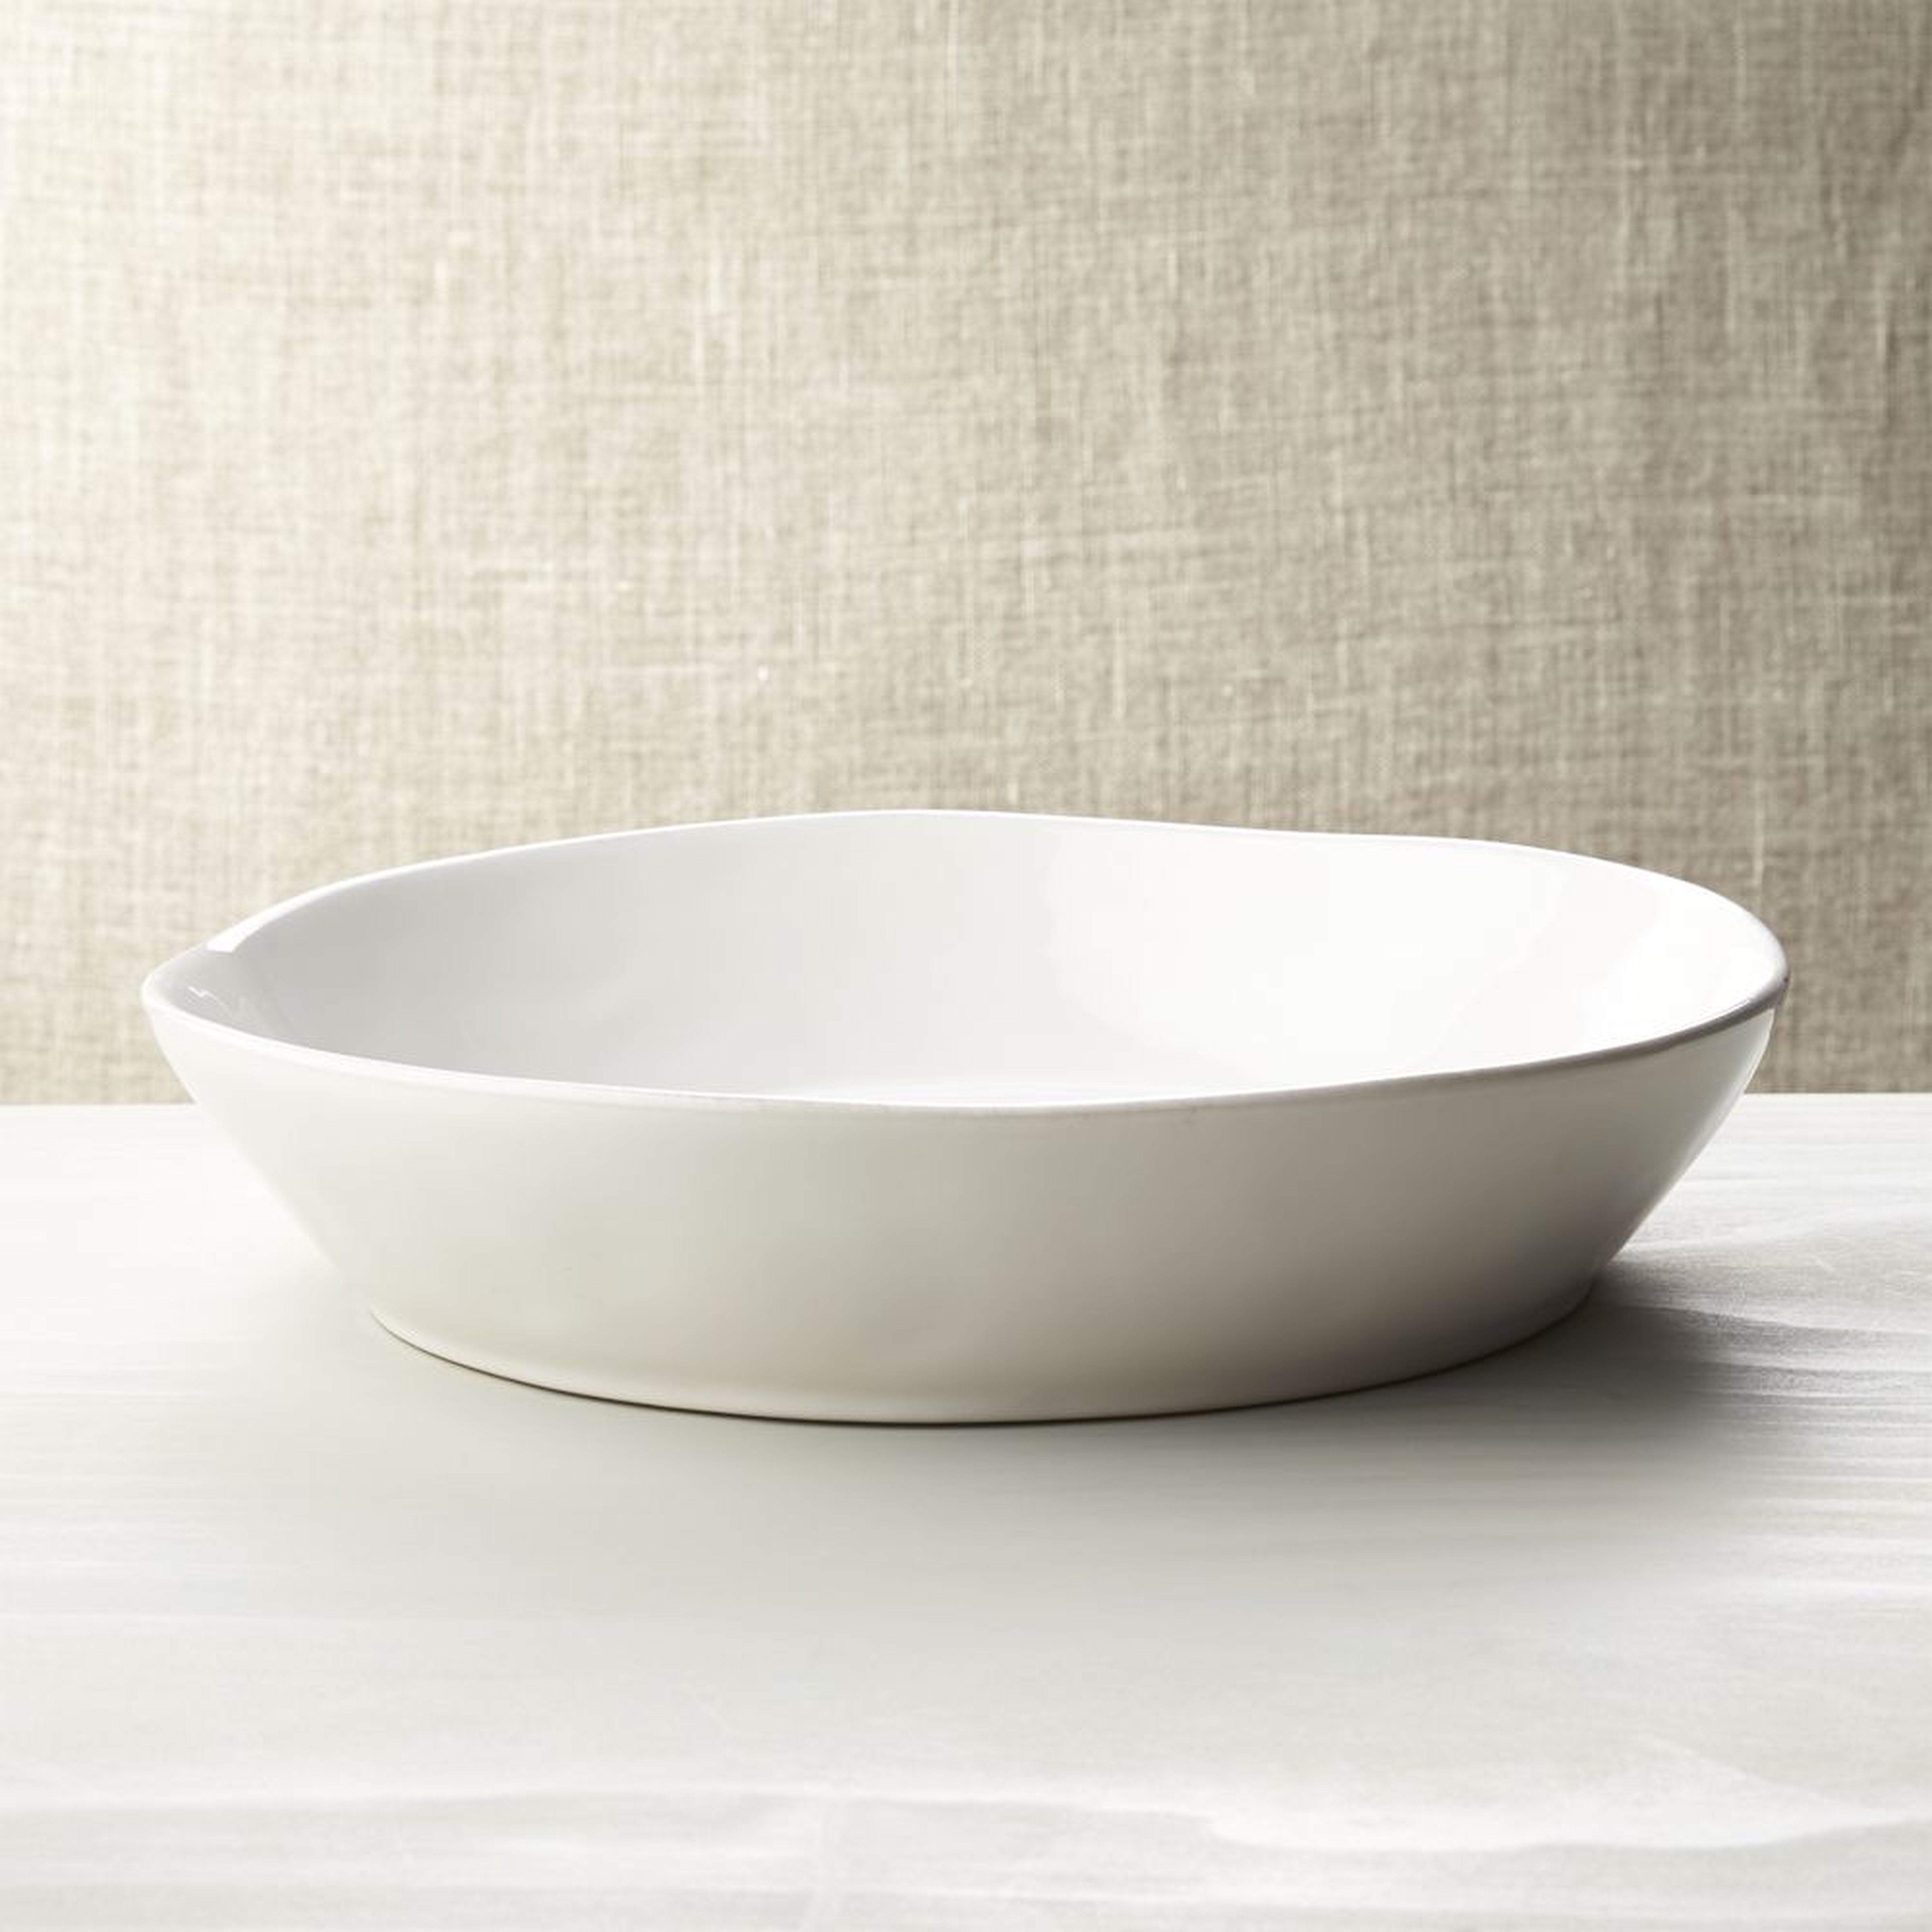 Marin White Centerpiece Bowl - Crate and Barrel